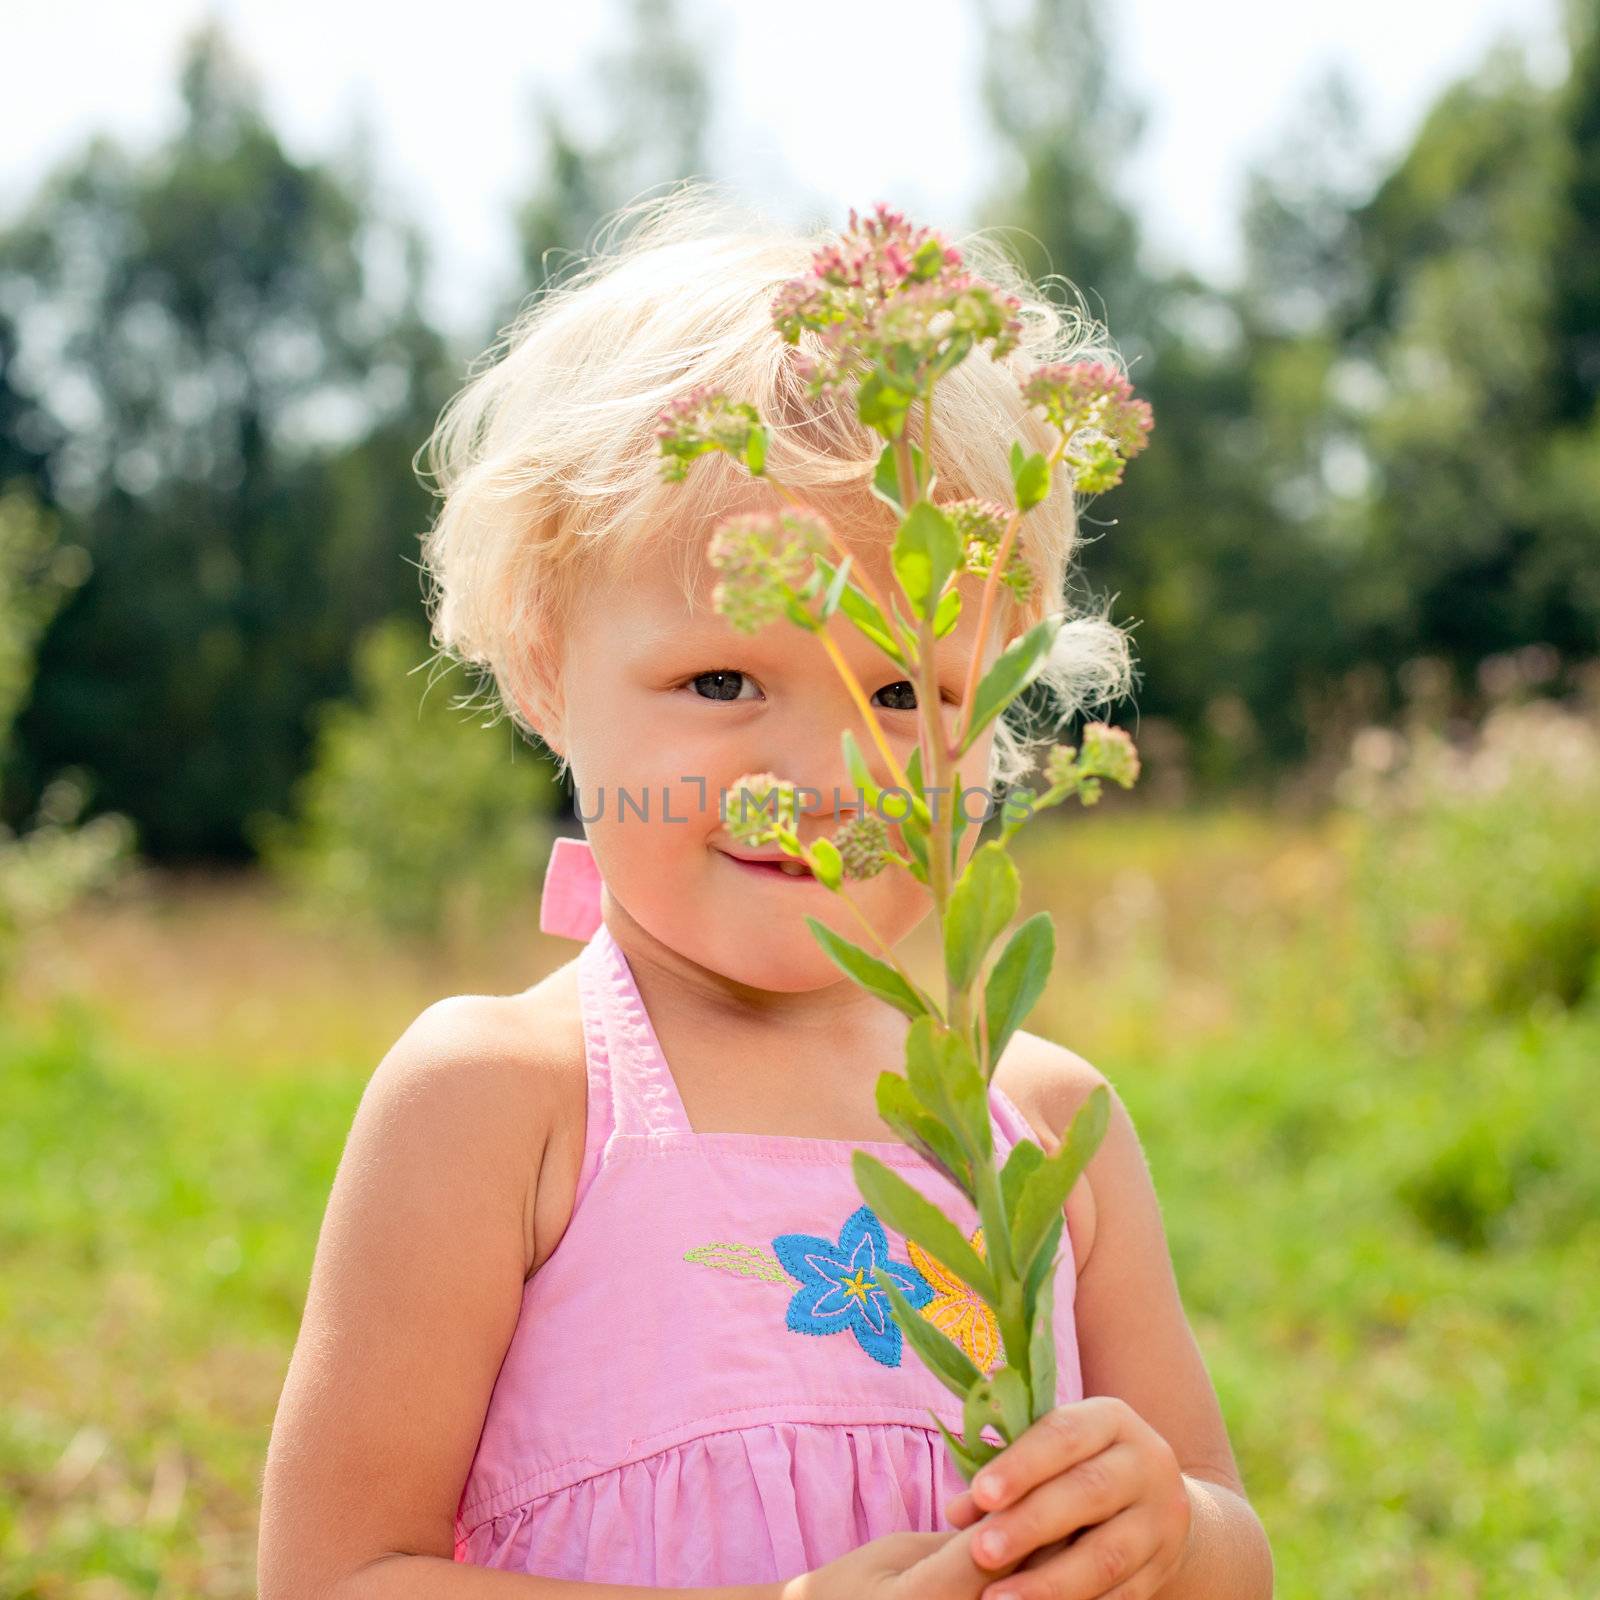 Portrait of cute little girl holding fower outdoors